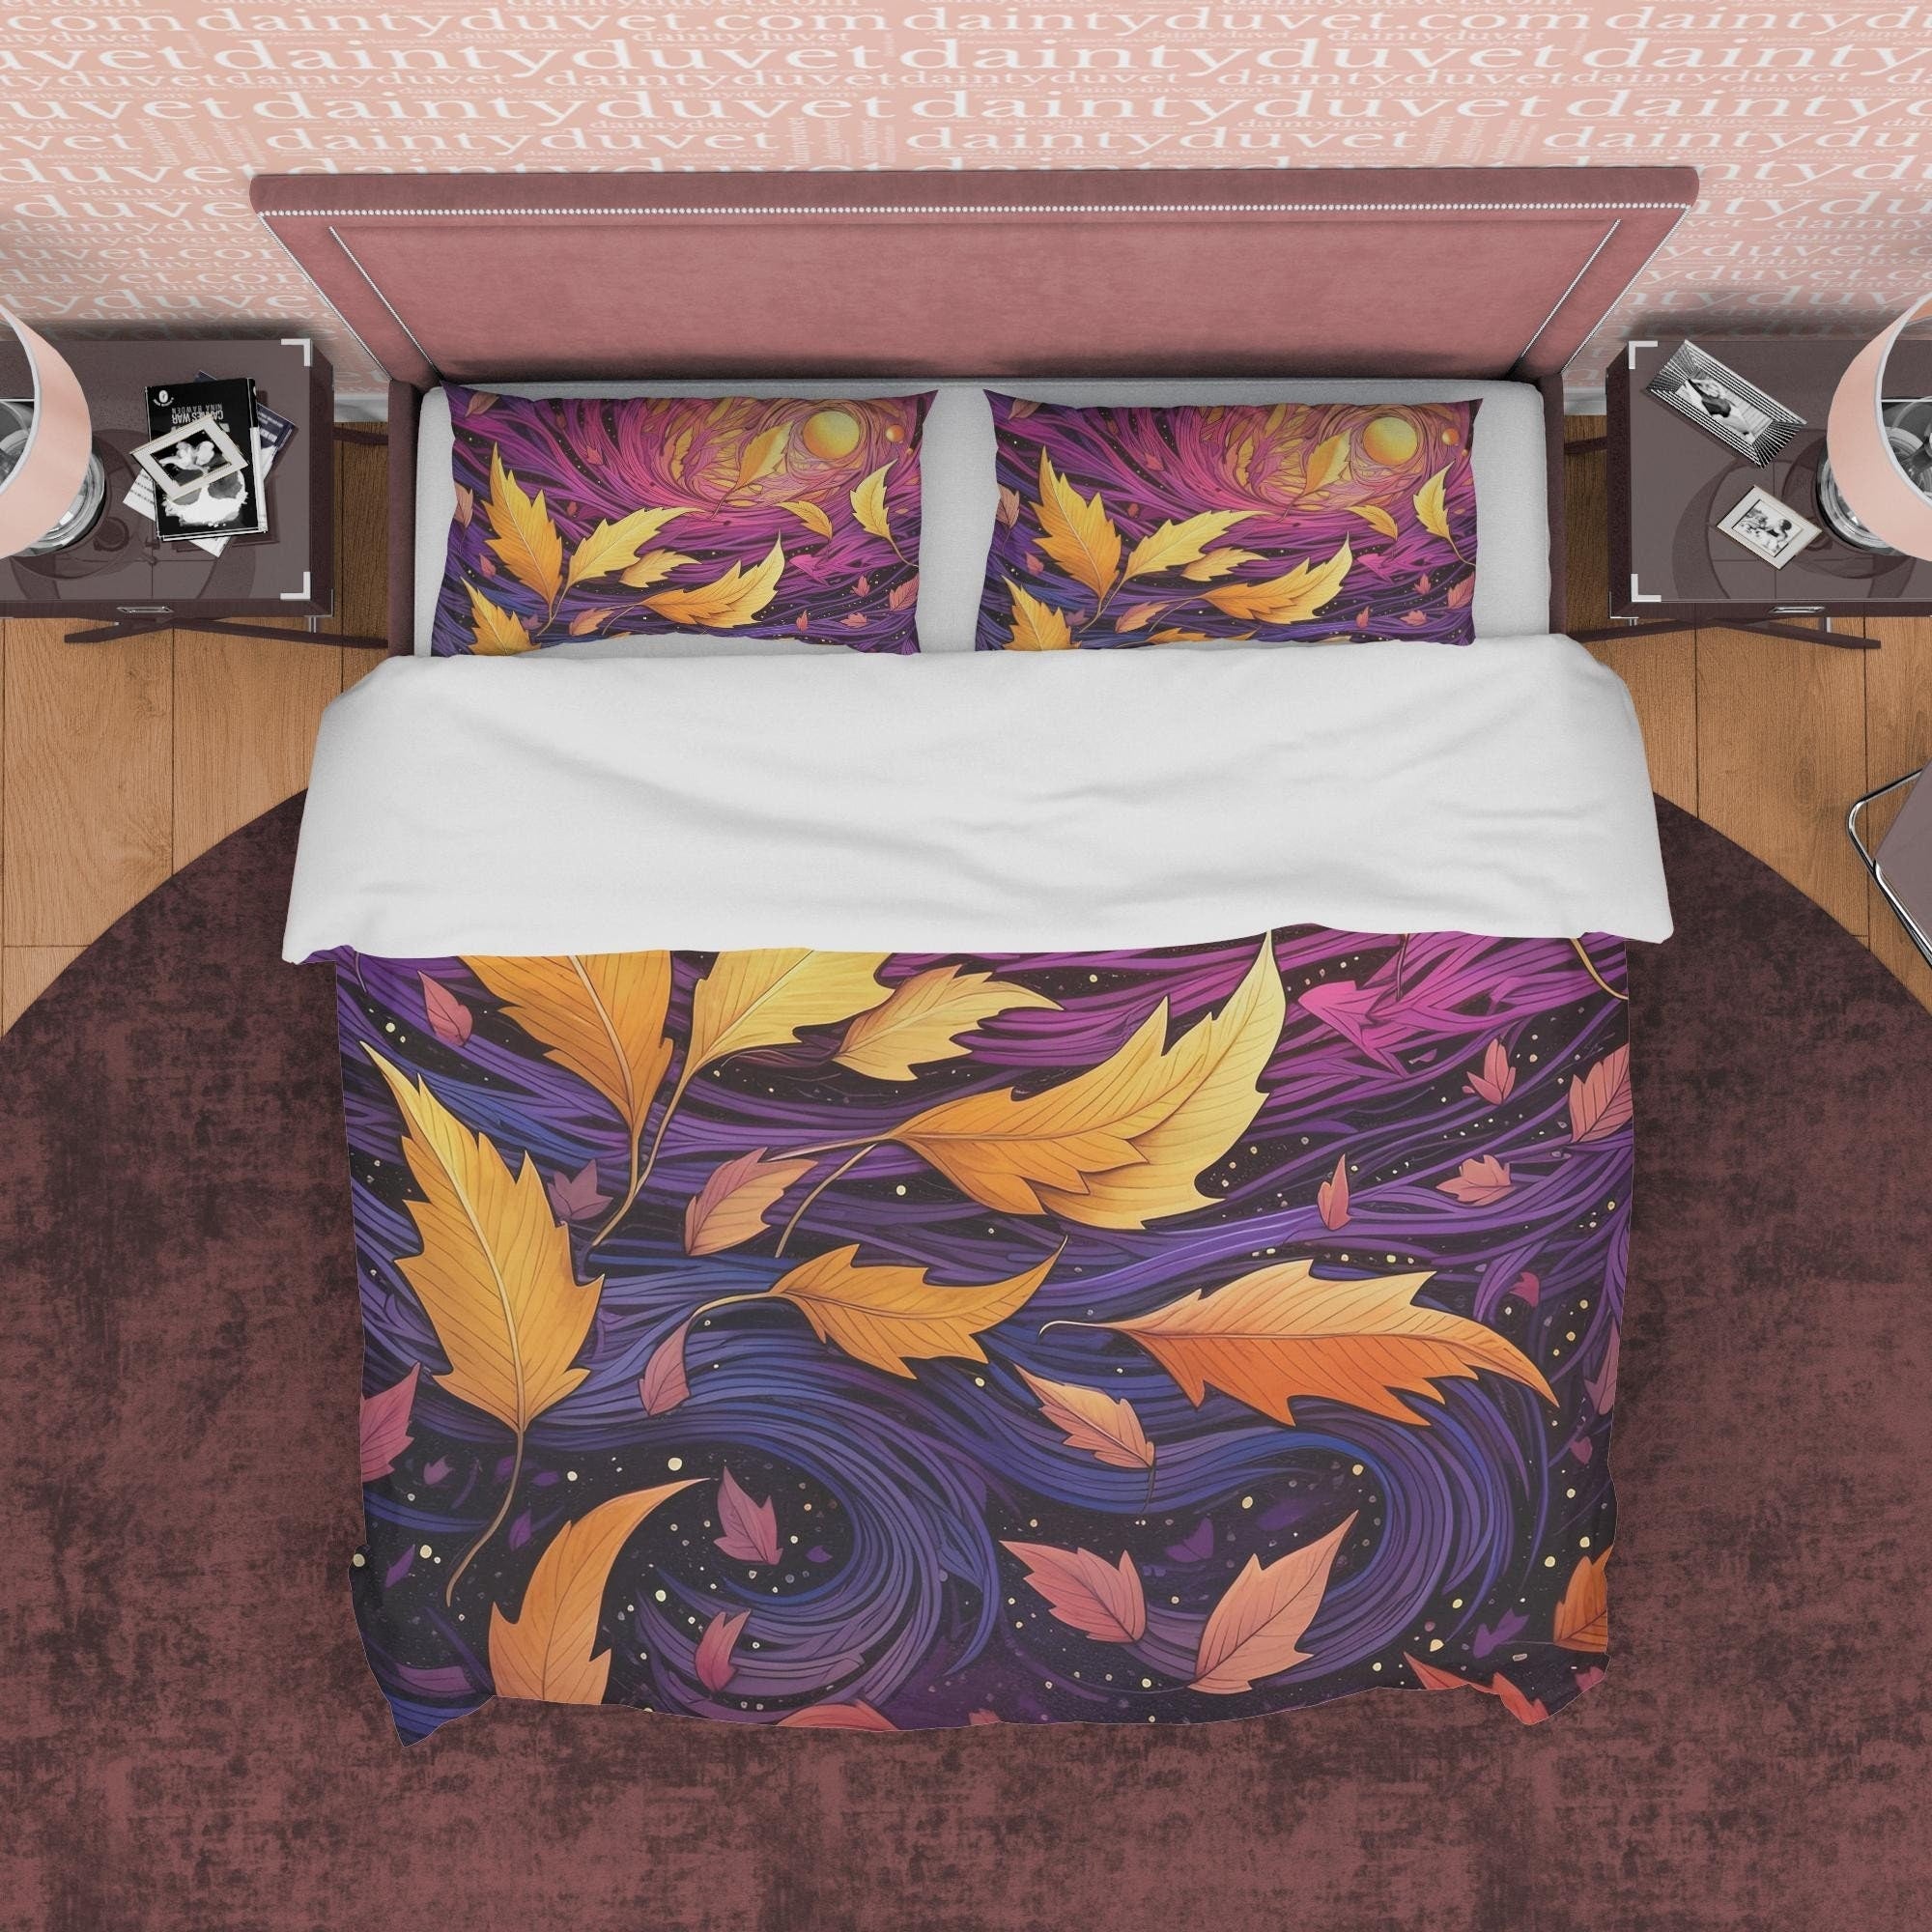 Yellow Fall Leaves Duvet Cover Purple Autumn Bedding Set, Warm Autumn Colors Printed Quilt Cover, Foliage Bedspread